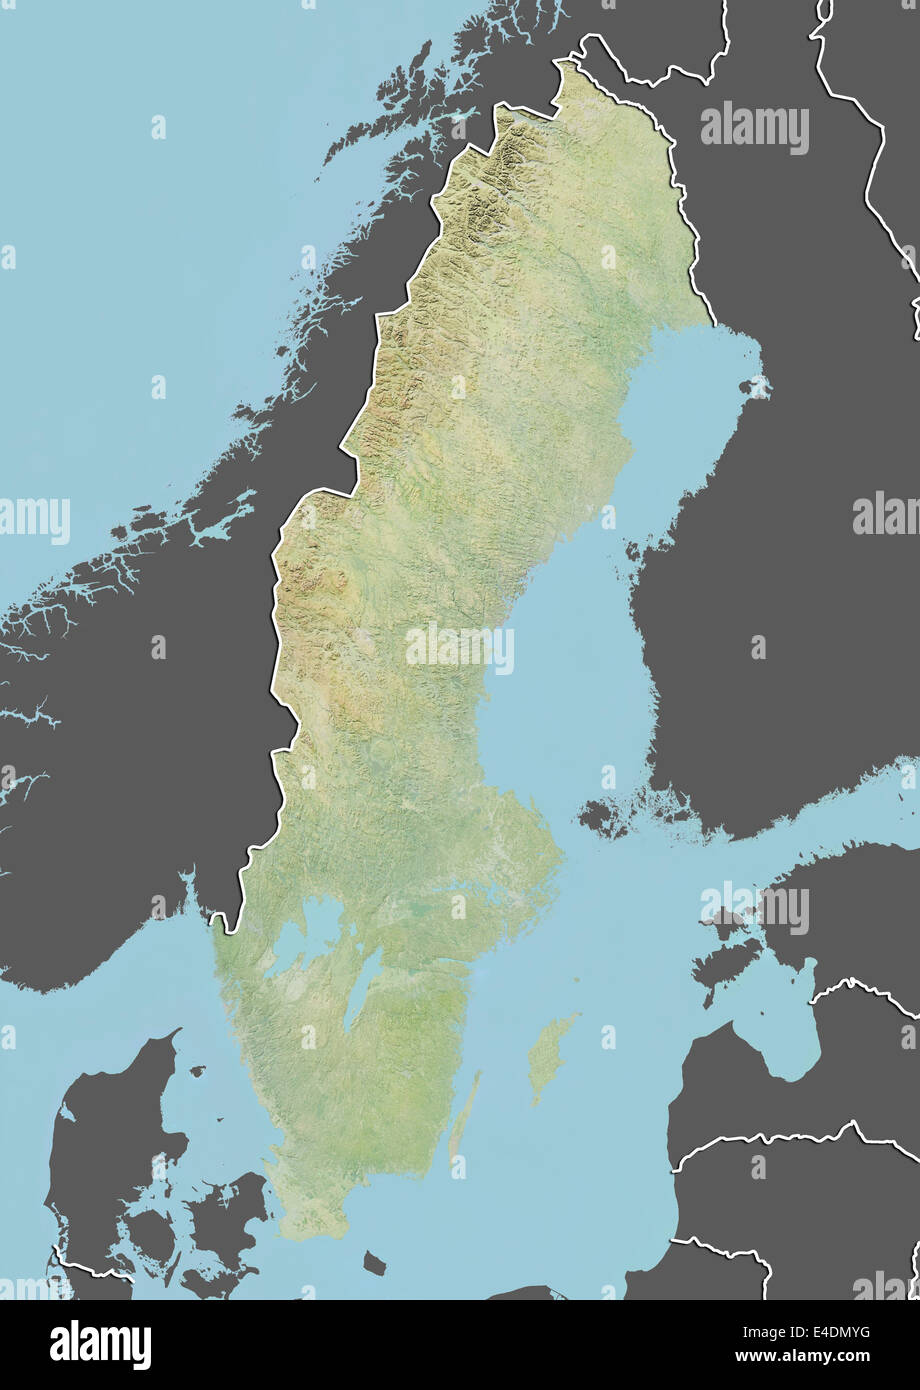 Sweden, Relief Map with Border and Mask Stock Photo